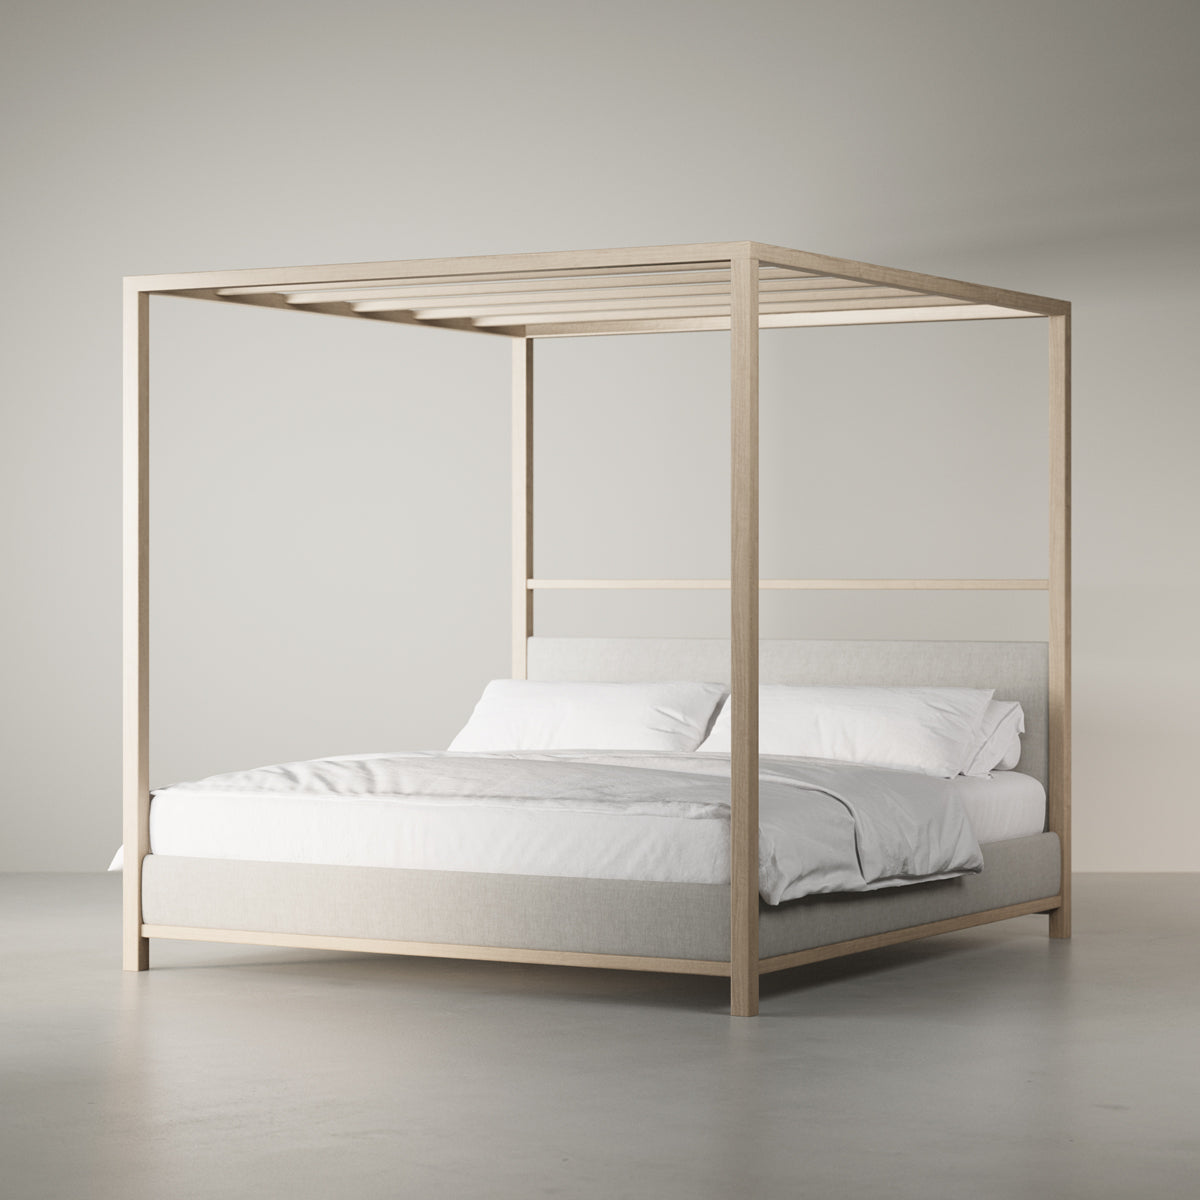 Palisades Canopy Bed Frame